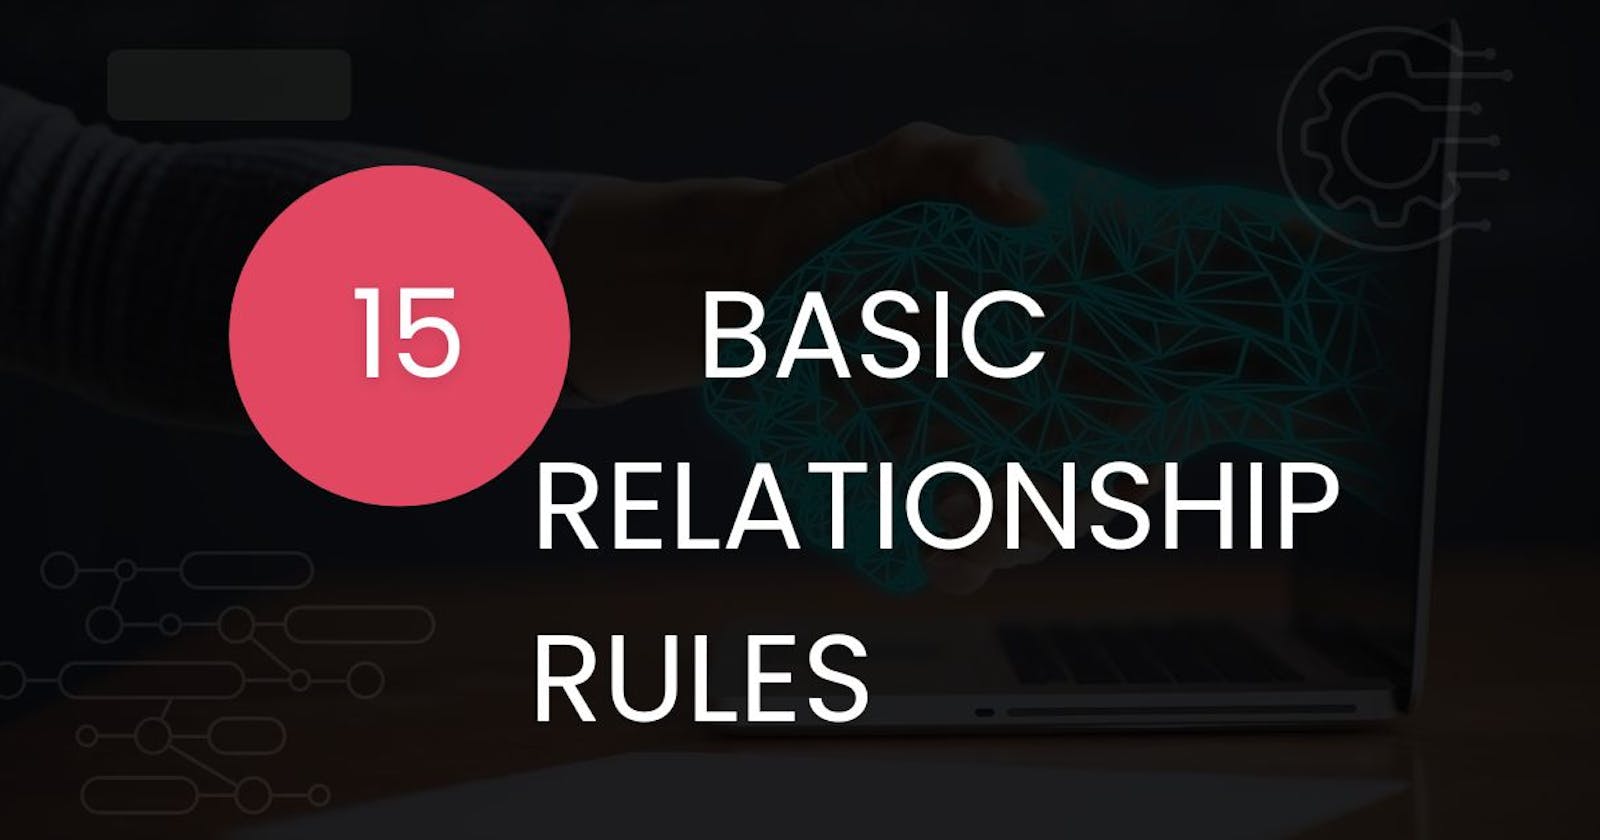 15 Basic Relationship Rules that everyone should know